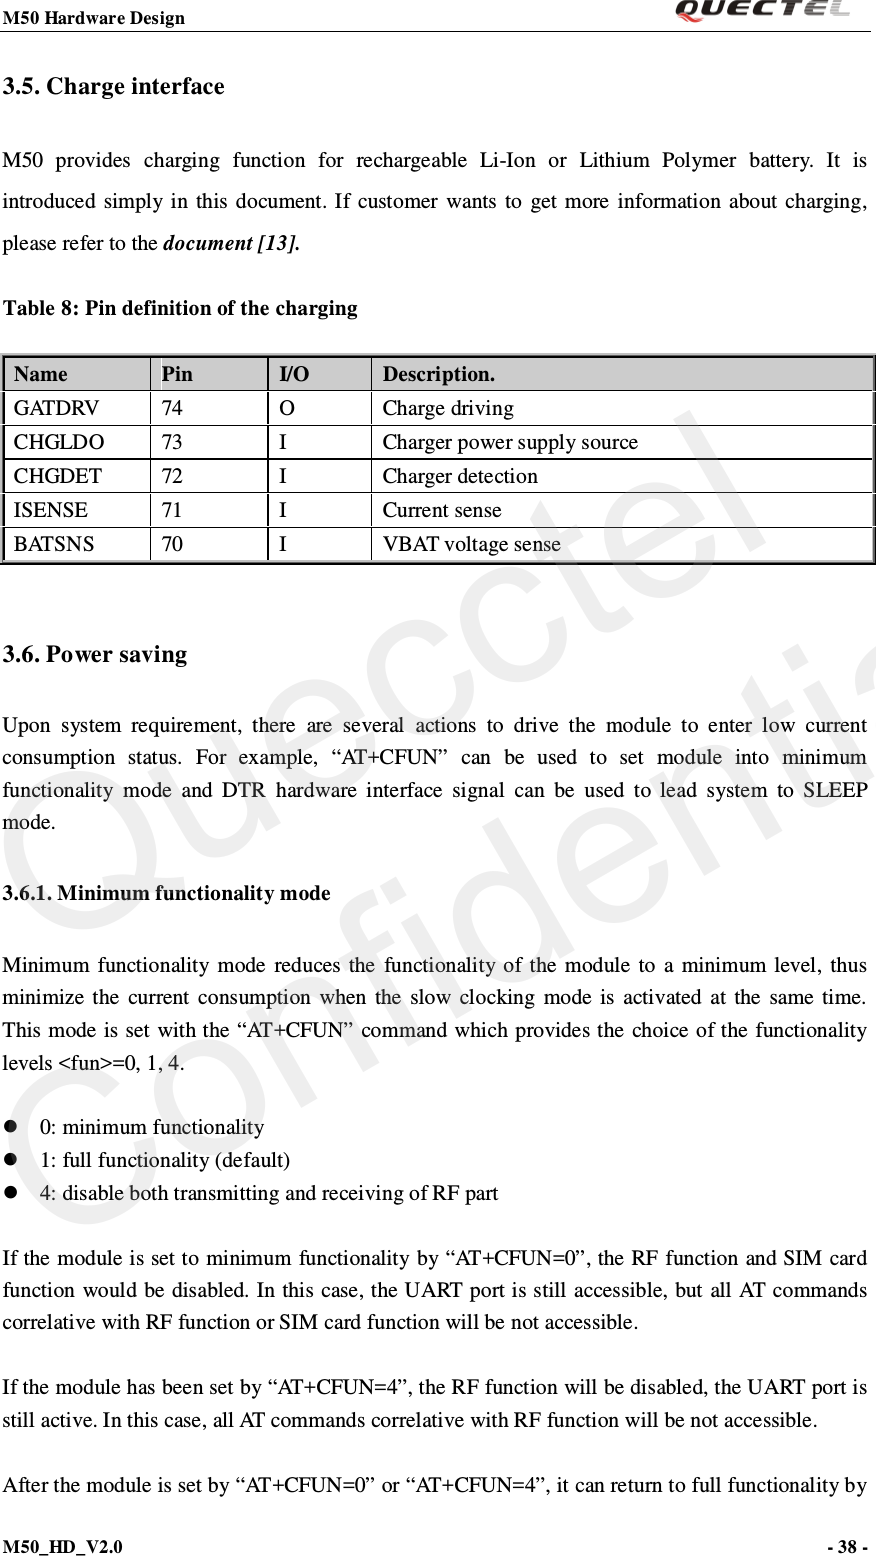 M50 Hardware Design                                                                M50_HD_V2.0                                                                      - 38 -   3.5. Charge interface M50  provides  charging function for rechargeable Li-Ion or Lithium Polymer battery.  It is introduced simply in this document. If customer wants to get more information about charging, please refer to the document [13]. Table 8: Pin definition of the charging Name Pin I/O Description. GATDRV 74  O  Charge driving CHGLDO 73  I  Charger power supply source CHGDET 72  I  Charger detection ISENSE 71  I  Current sense B AT S N S  70  I  VBAT voltage sense  3.6. Power saving Upon system requirement, there are several actions to drive the module to enter low current consumption status. For example, “AT+CFUN” can be used to set module into minimum functionality mode and DTR hardware interface signal can be used to lead system to SLEEP mode. 3.6.1. Minimum functionality mode Minimum functionality mode reduces the functionality of the module to a minimum level, thus minimize the current consumption when the slow clocking mode is activated at the same time. This mode is set with the “AT+CFUN” command which provides the choice of the functionality levels &lt;fun&gt;=0, 1, 4.   0: minimum functionality  1: full functionality (default)  4: disable both transmitting and receiving of RF part  If the module is set to minimum functionality by “AT+CFUN=0”, the RF function and SIM card function would be disabled. In this case, the UART port is still accessible, but all AT commands correlative with RF function or SIM card function will be not accessible.    If the module has been set by “AT+CFUN=4”, the RF function will be disabled, the UART port is still active. In this case, all AT commands correlative with RF function will be not accessible.    After the module is set by “AT+CFUN=0” or “AT+CFUN=4”, it can return to full functionality by Quecctel Confidential